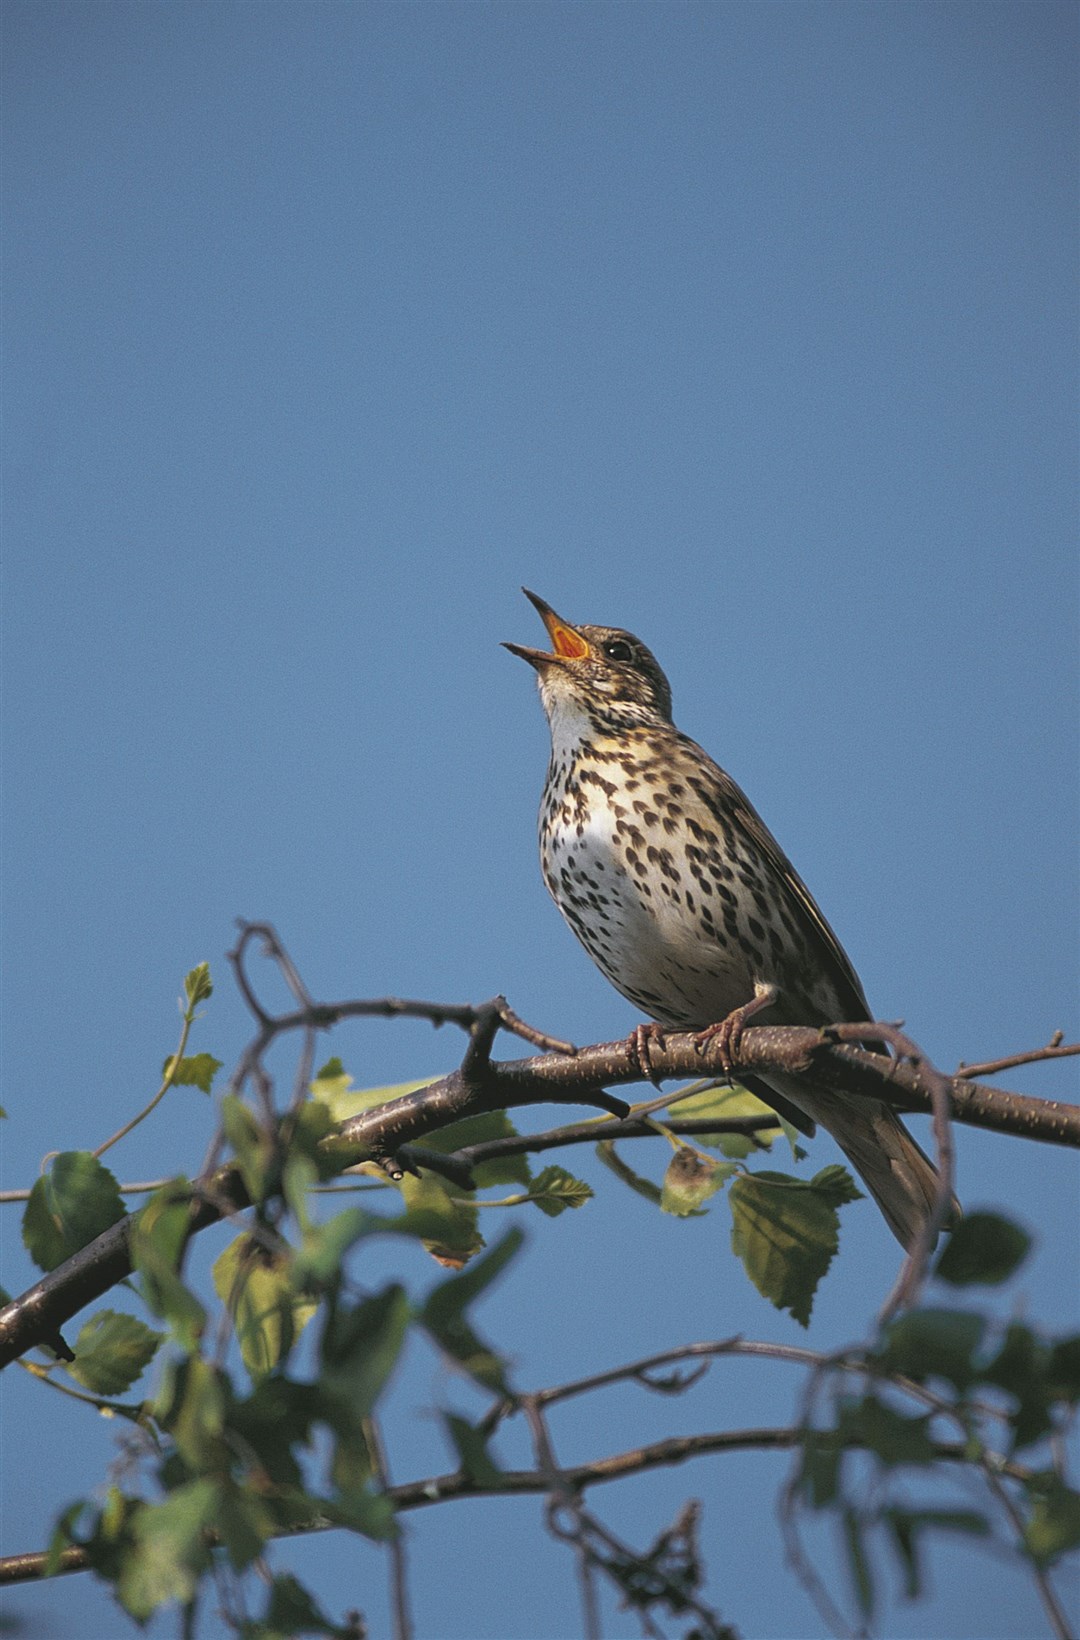 A song thrush singing whilst perched on a branch but they are being heard less often. Chris Gomersall (rspb-images.com)